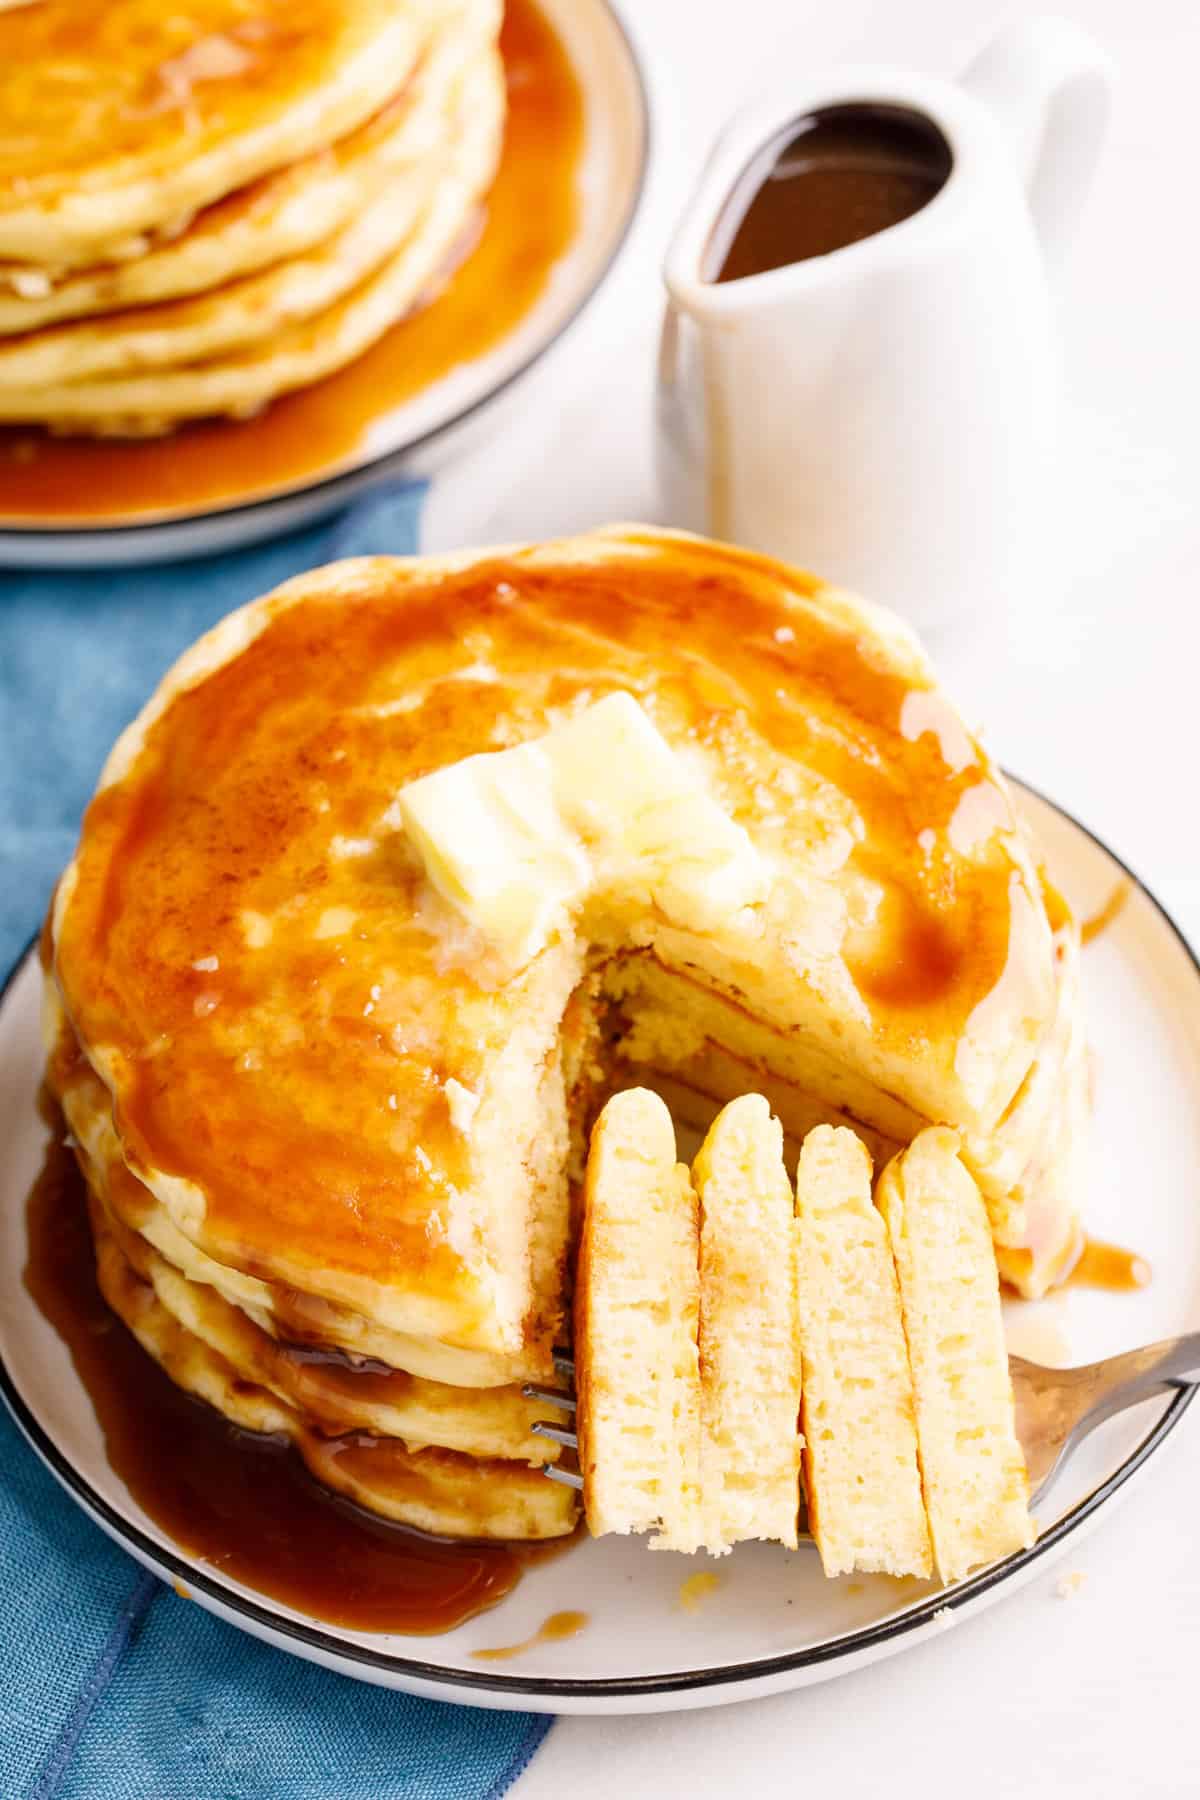 stack of four pancakes with syrup and butter cut into to show the cross section